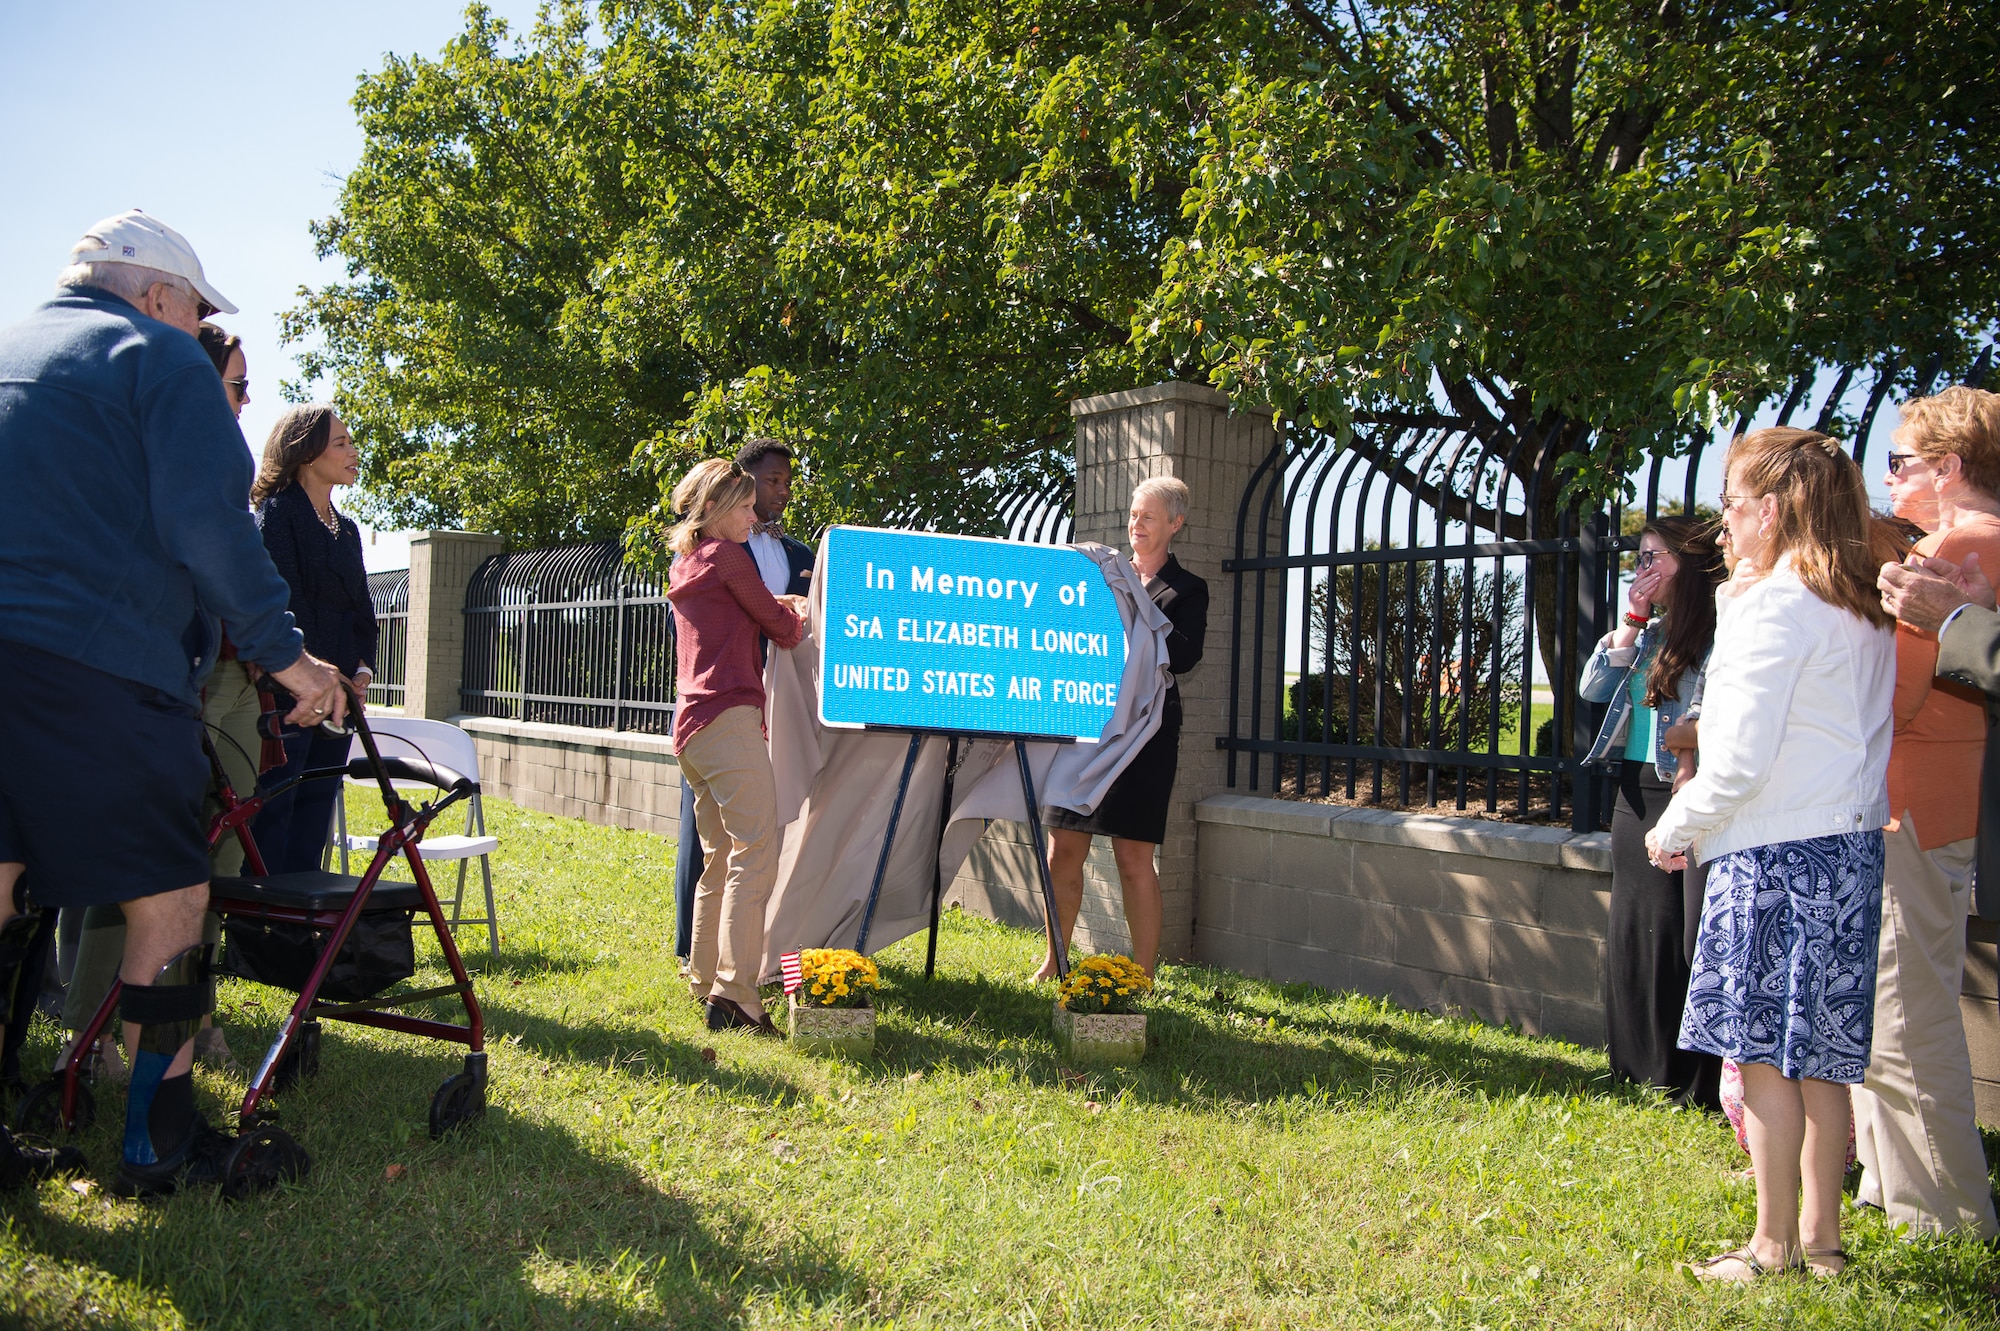 Family members and friends watch as the memorial sign is unveiled during the Senior Airman Elizabeth Loncki bridge dedication ceremony Oct. 12, 2018, at Dover Air Force Base, Del.